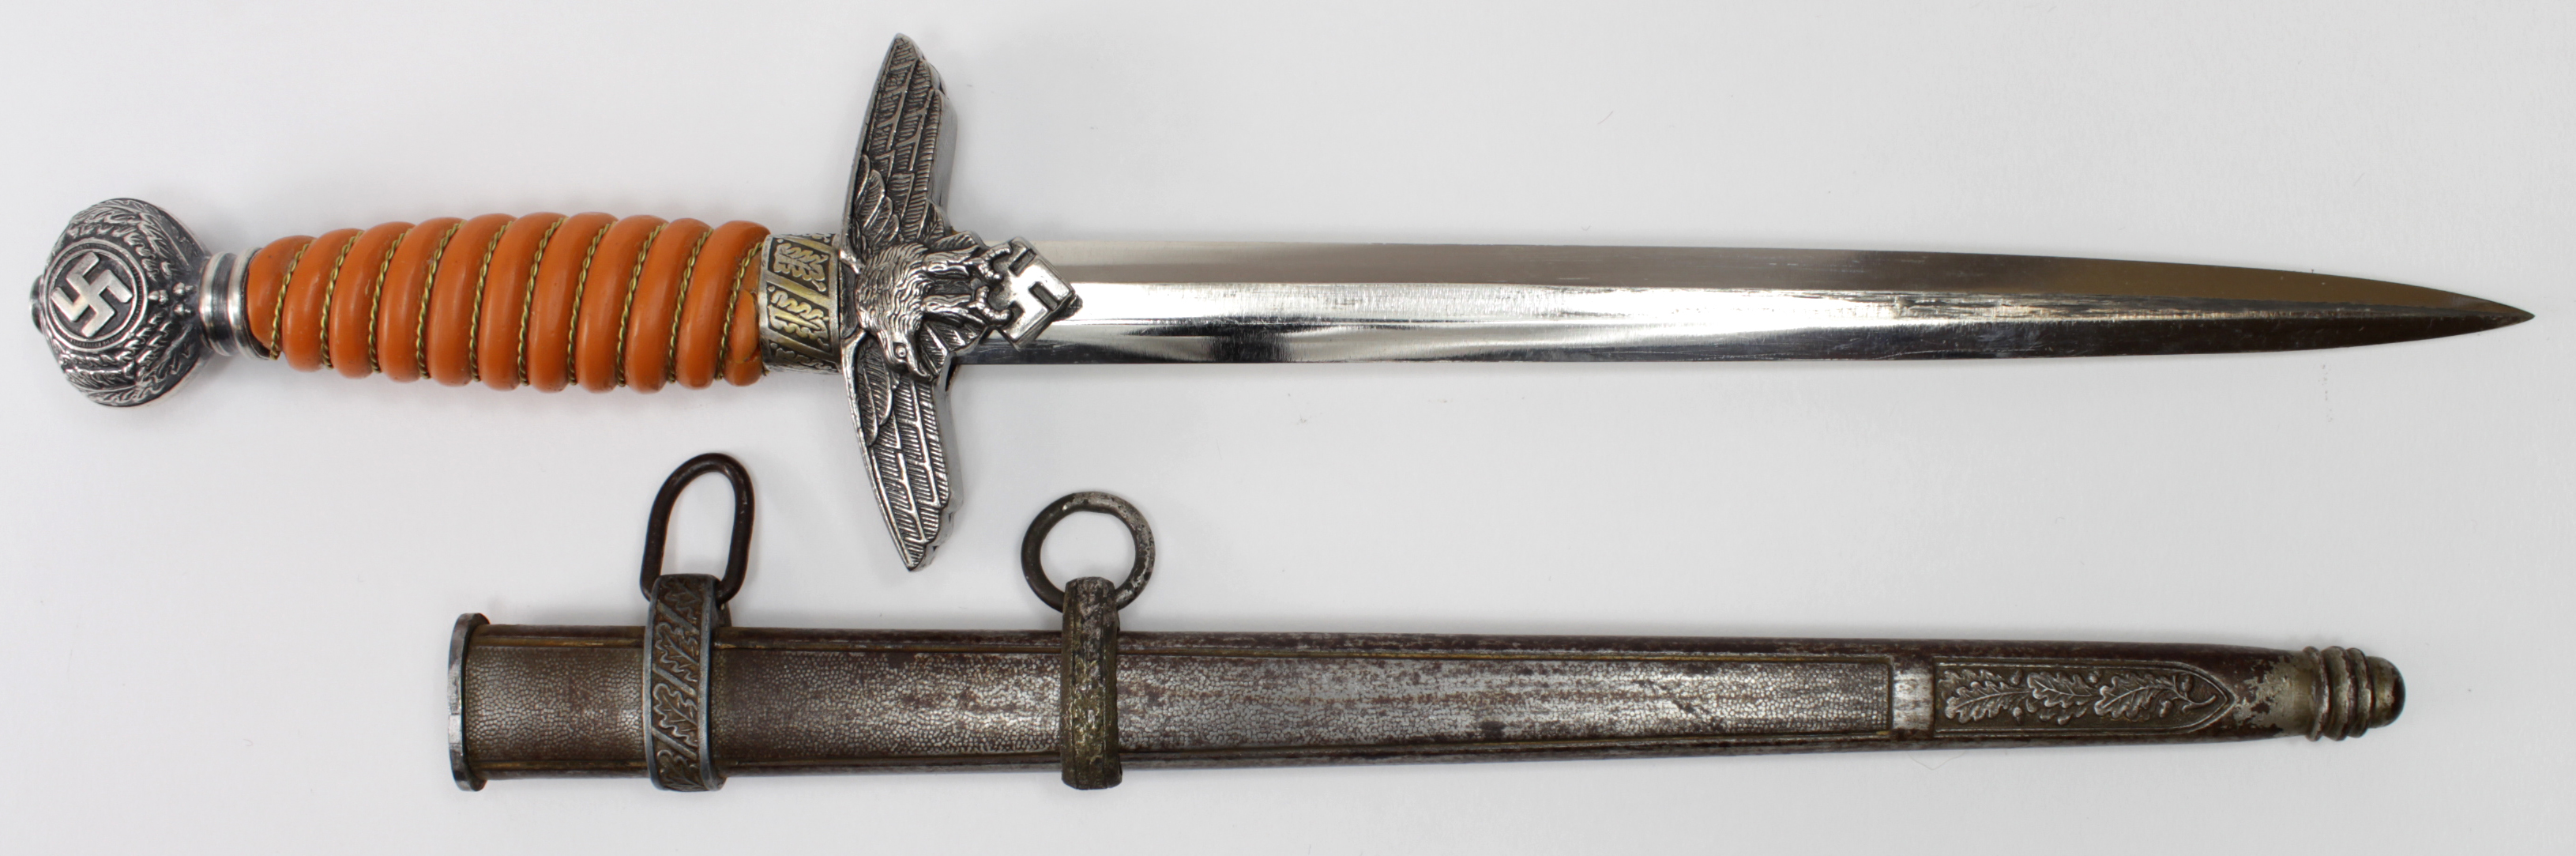 German Luftwaffe 2nd pattern dagger, likely a composite piece, sold as seen